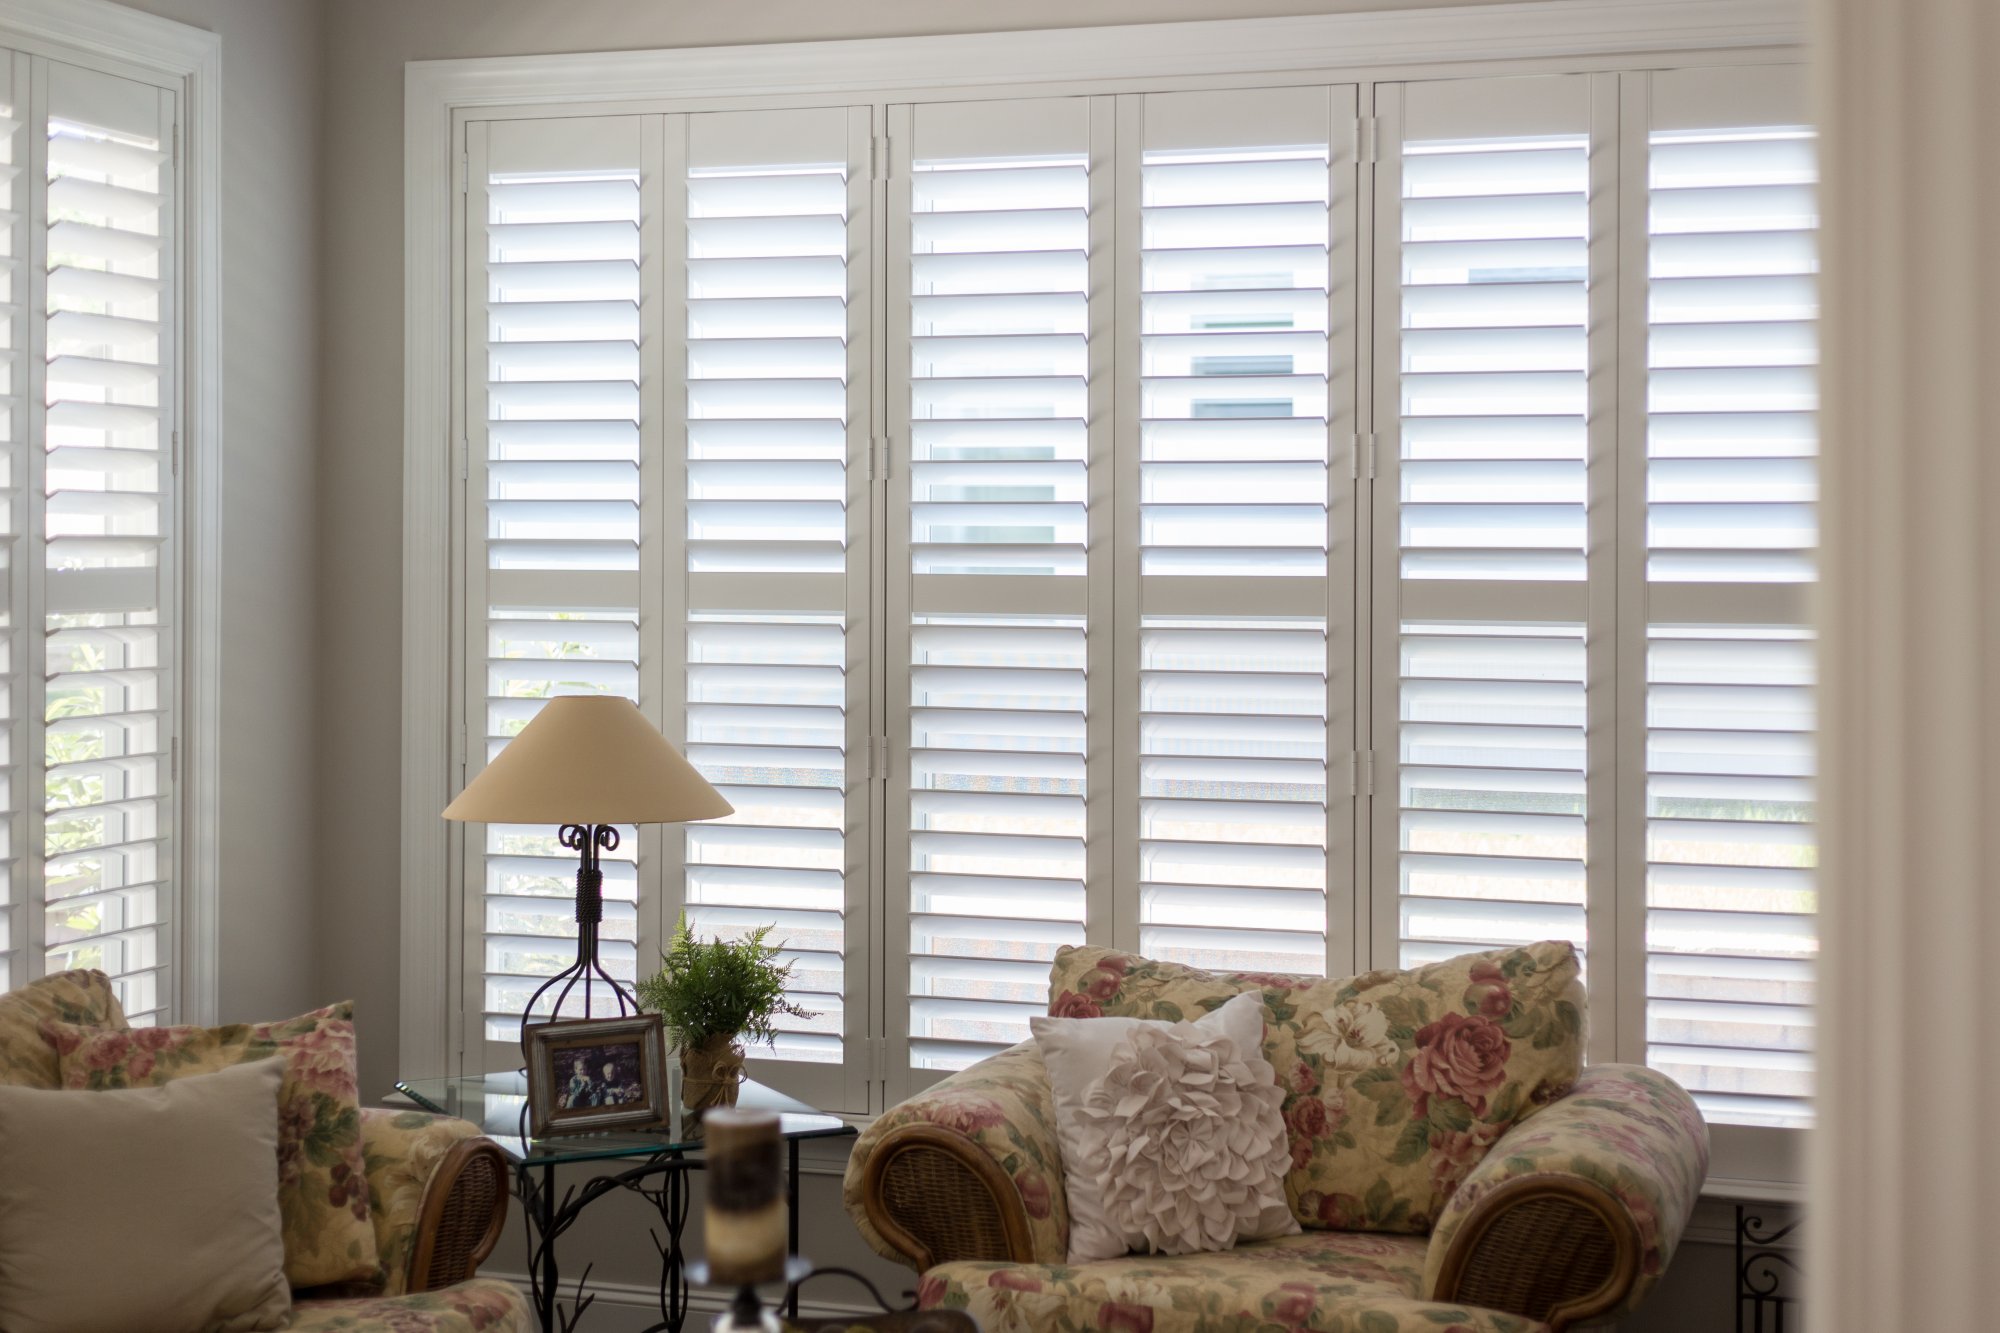 at sunburst shutters, weu0027re here to provide you with quality window PVIUCTN